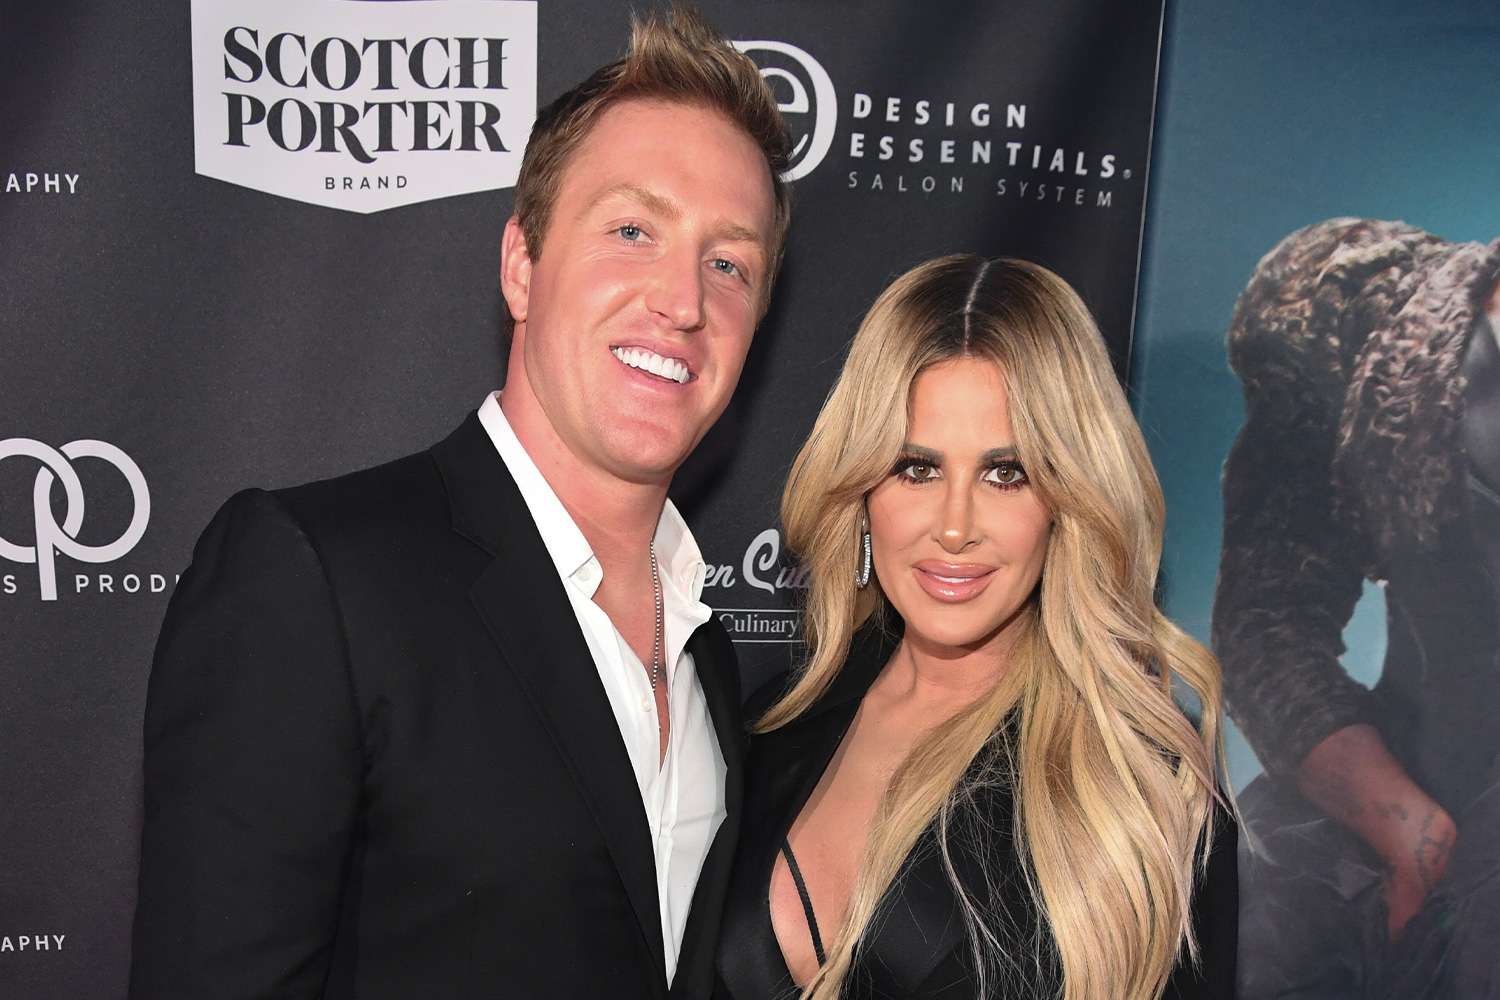 Kroy Biermann Won’t Reconcile with Kim Zolciak Despite Her Claims They’re ‘Working on Marriage’: Lawyer